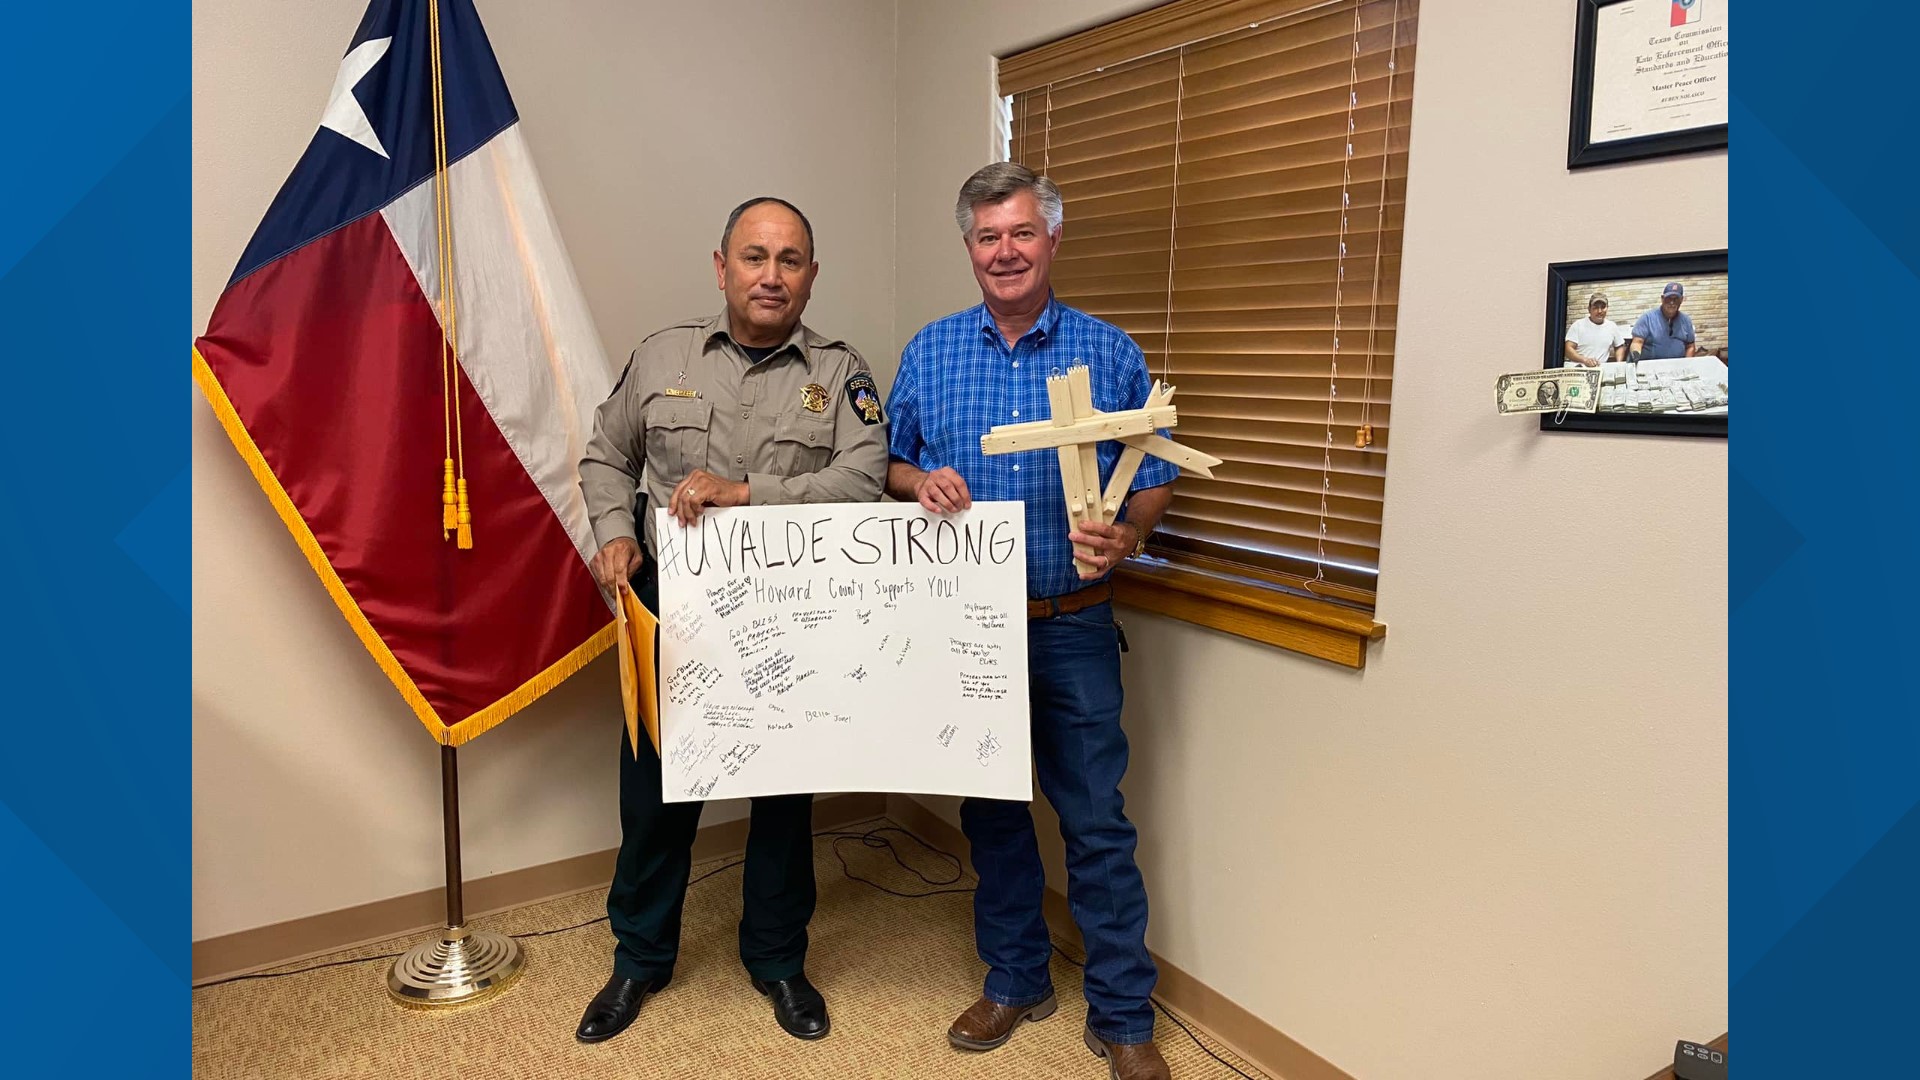 A 90-year-old Ector County resident also donated hand made crosses to the Uvalde community through the Howard County Sheriff's Office.